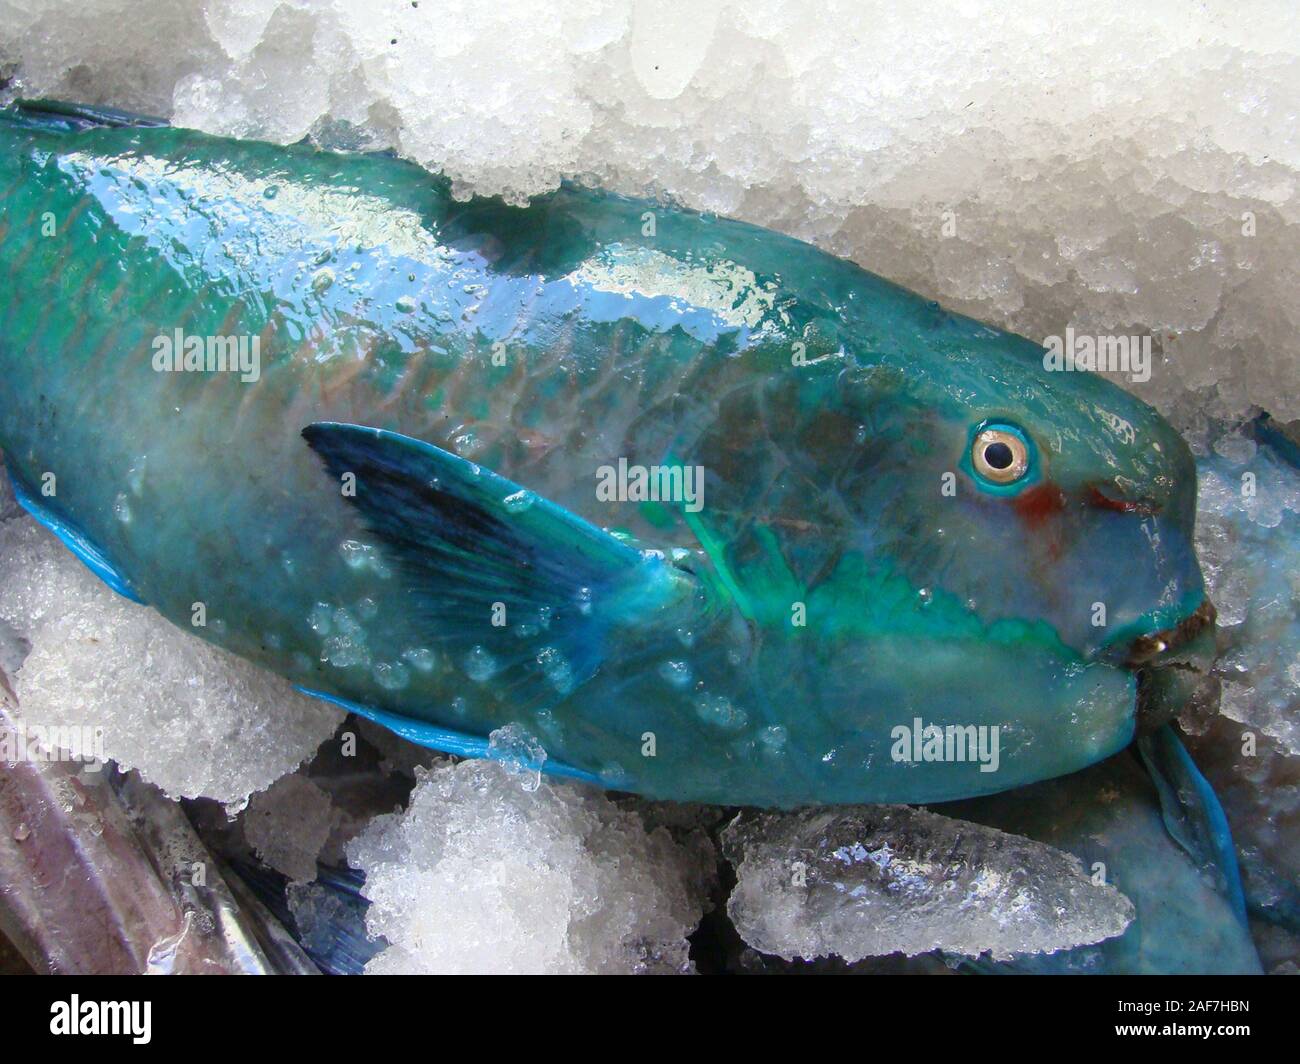 Freshly caught Parrotfish in a fish stall in Mindoro island, Philippines Stock Photo